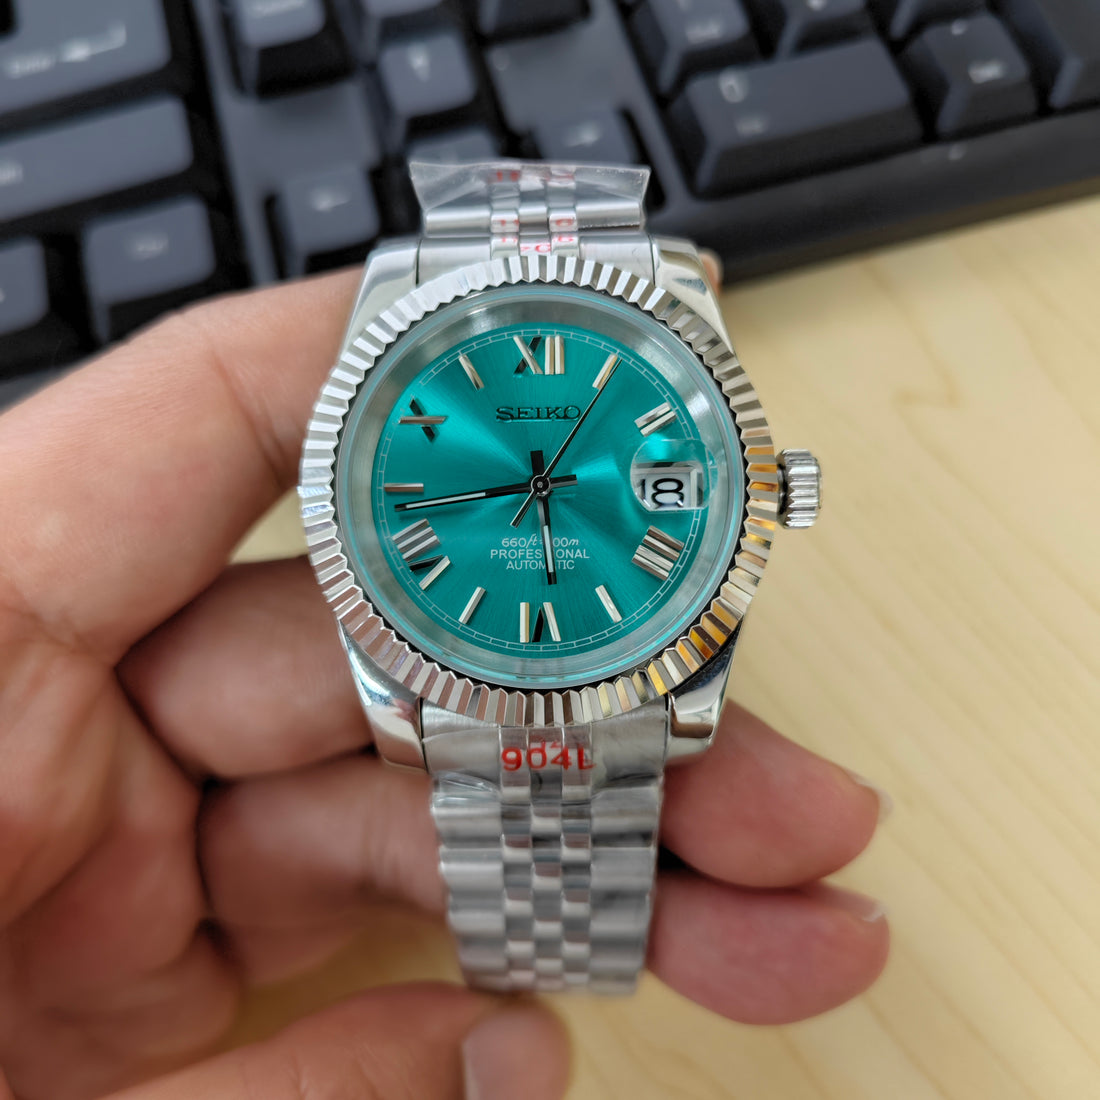 Teal Dial Date Just - Fluted Bezel- Roman Numeral- Jubilee Bracelet - NH35 Automatic Movement